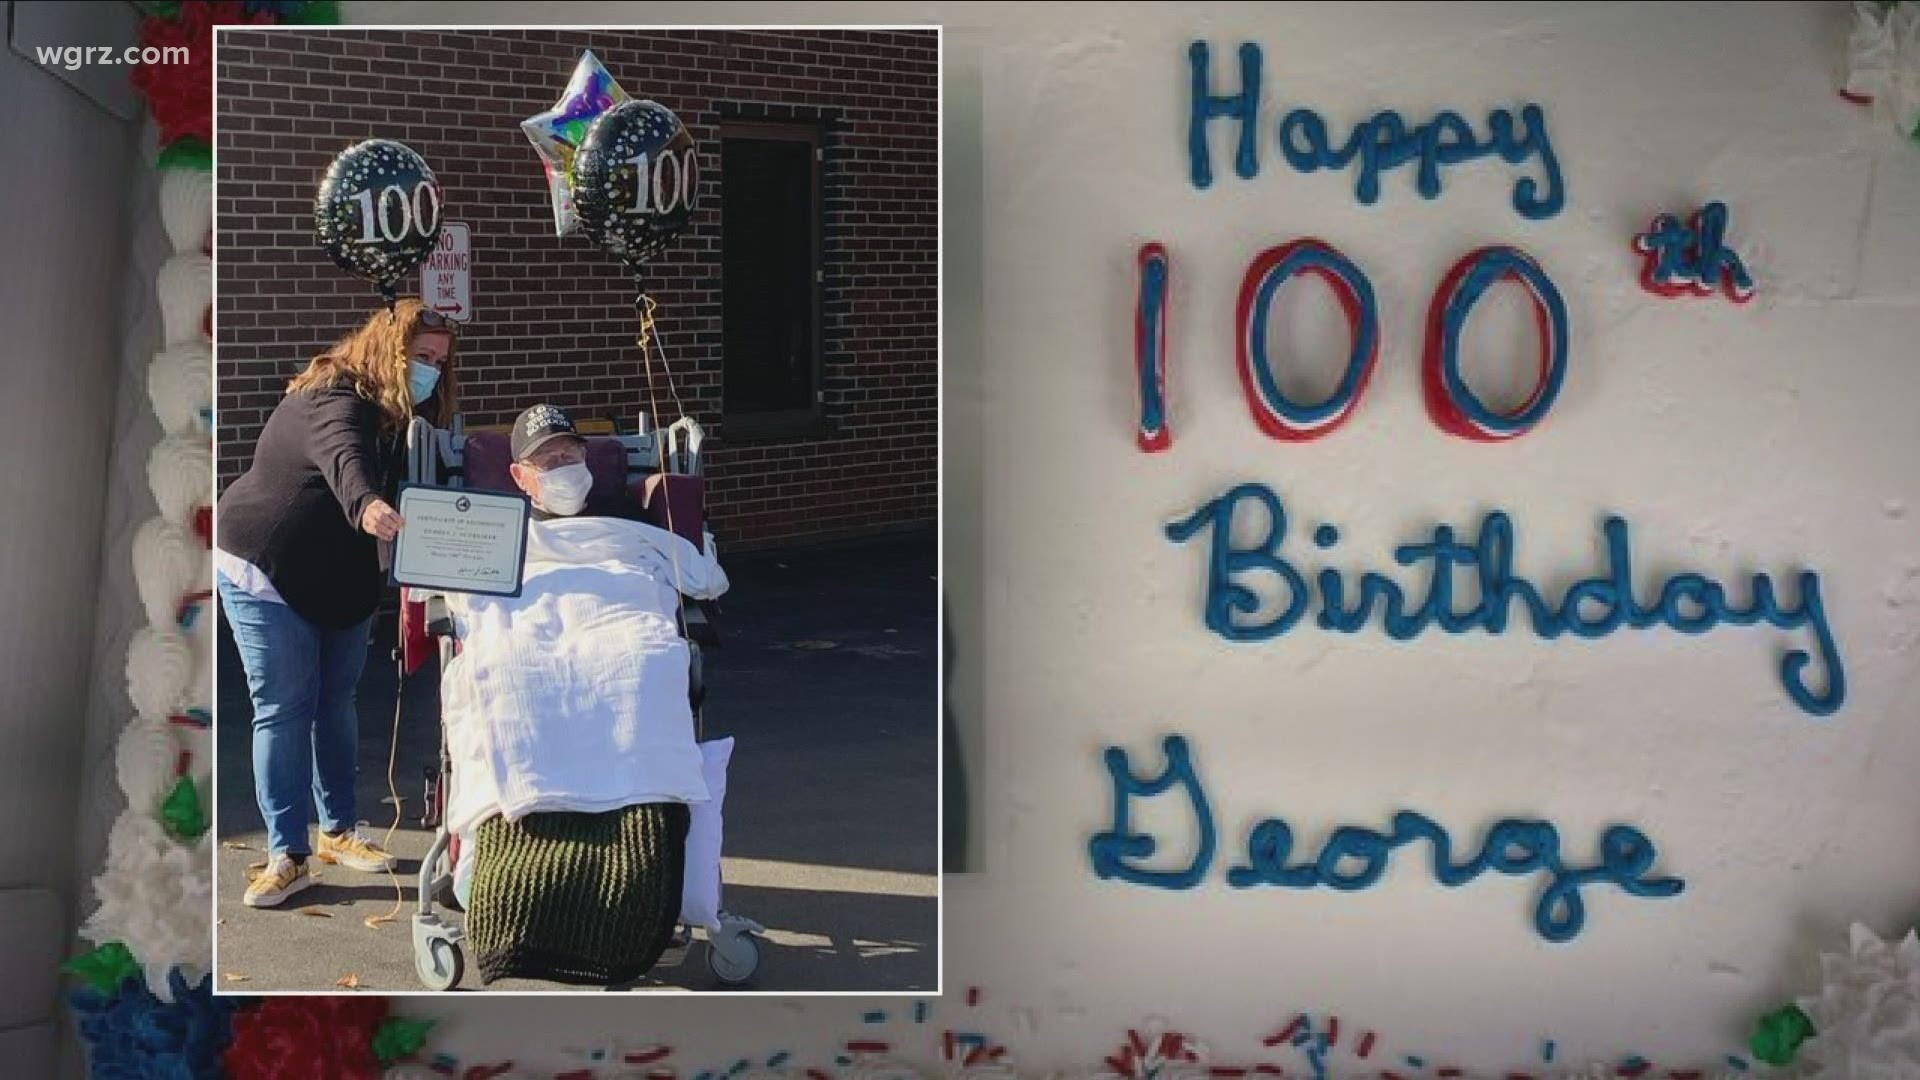 We also want to wish a happy 100th birthday to a long-time Allegany resident tonight, George Schrieber Junior.